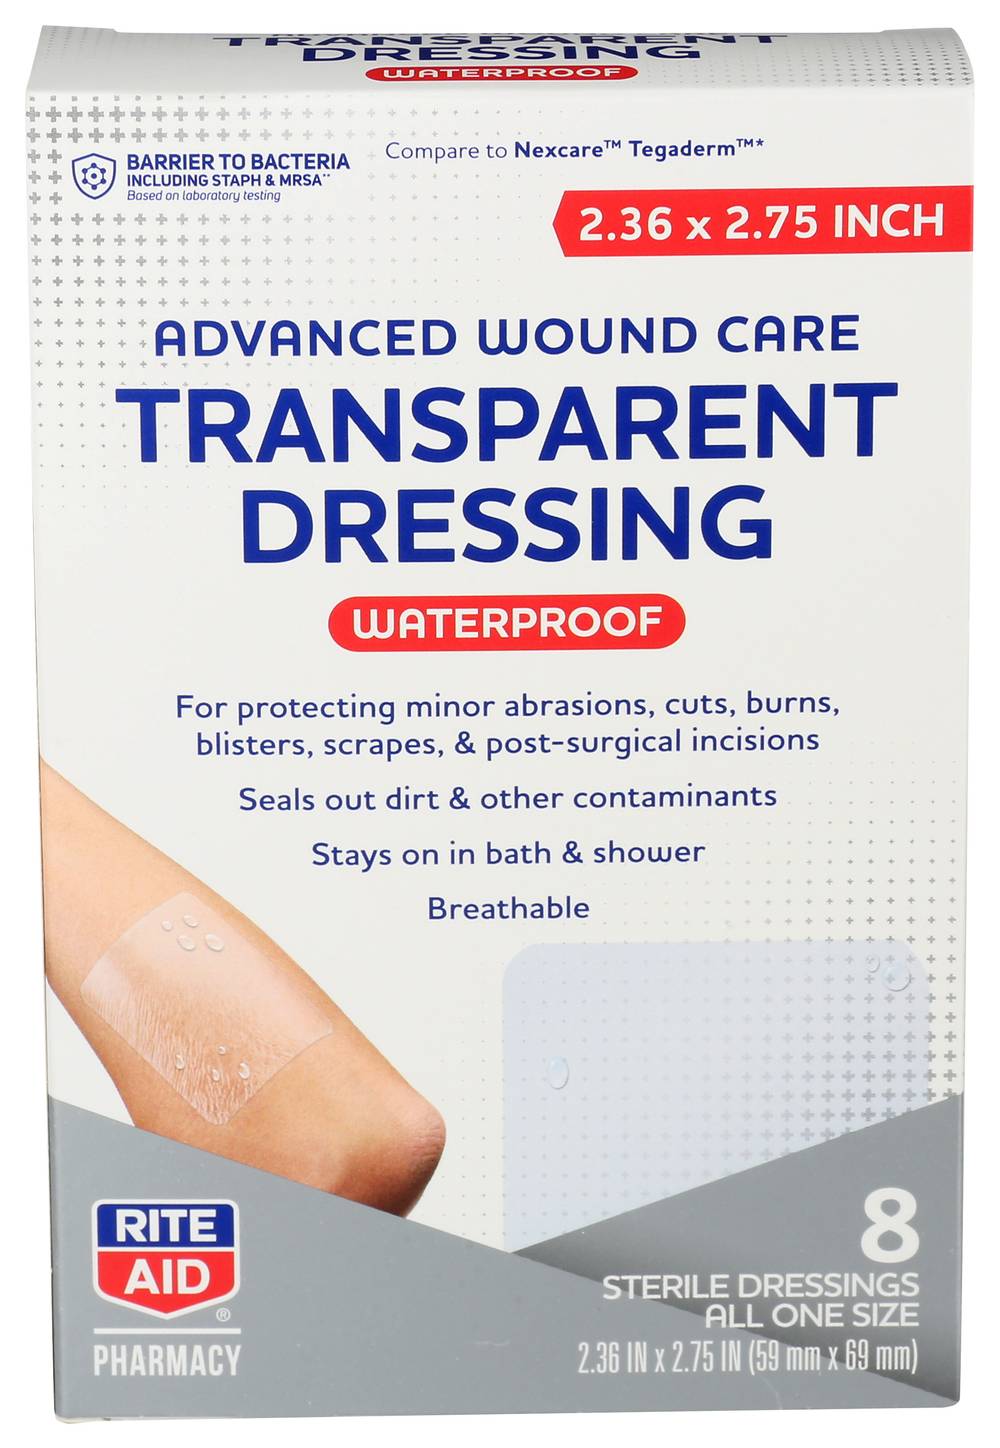 Rite Aid Advanced Wound Care Waterproof Transparent Dressing One Size (8 ct)